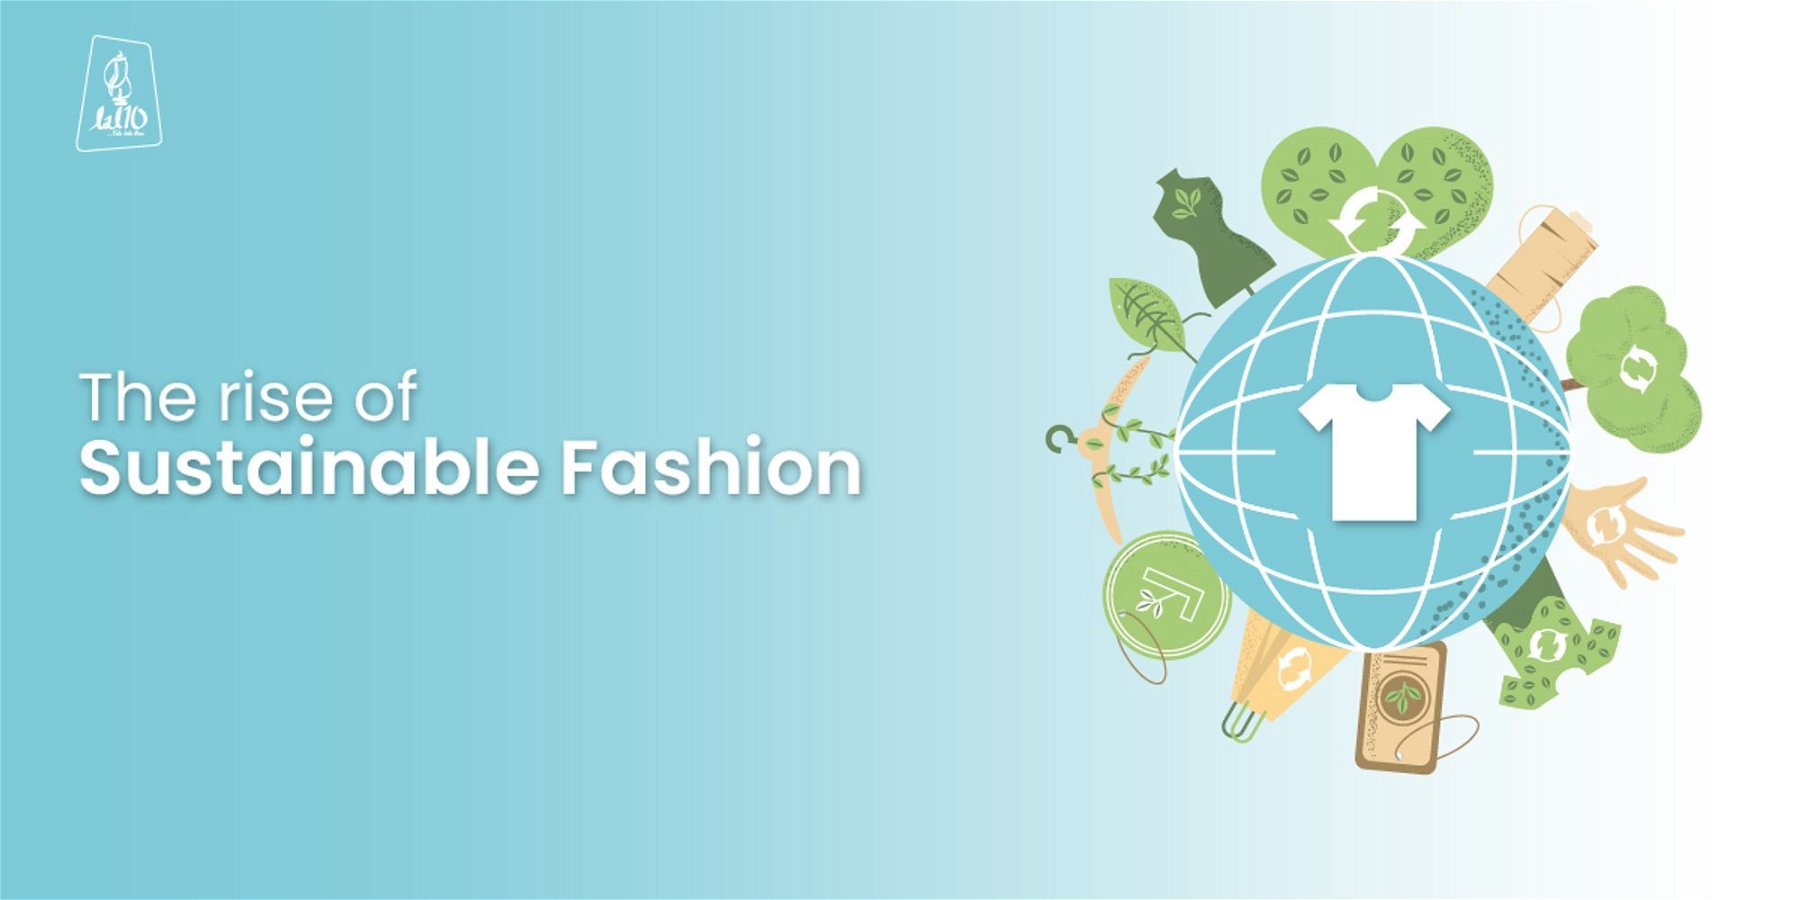 The rise of sustainable fashion